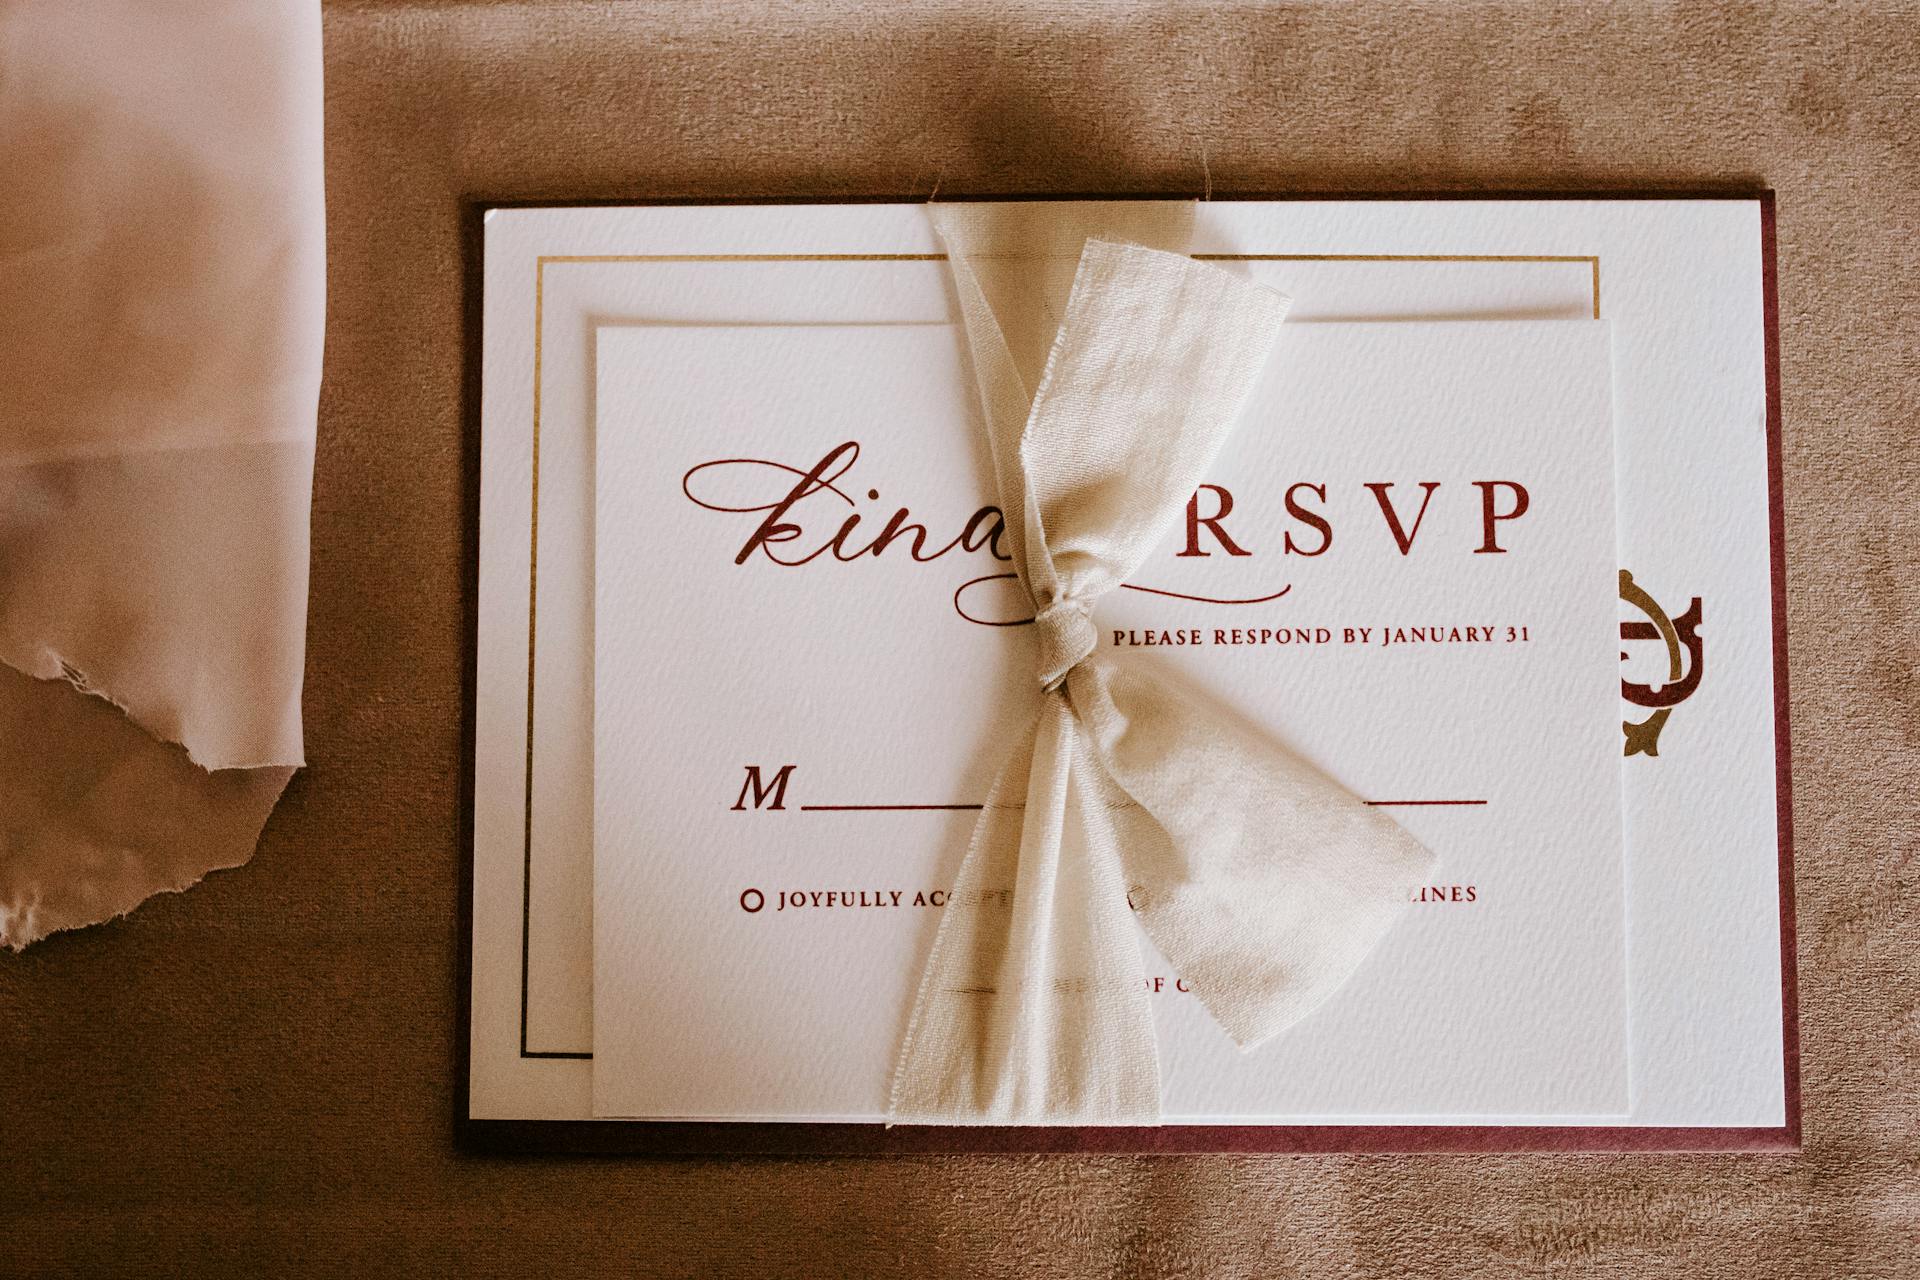 An invitation card with the inscription tied with ribbon | Source: Pexels